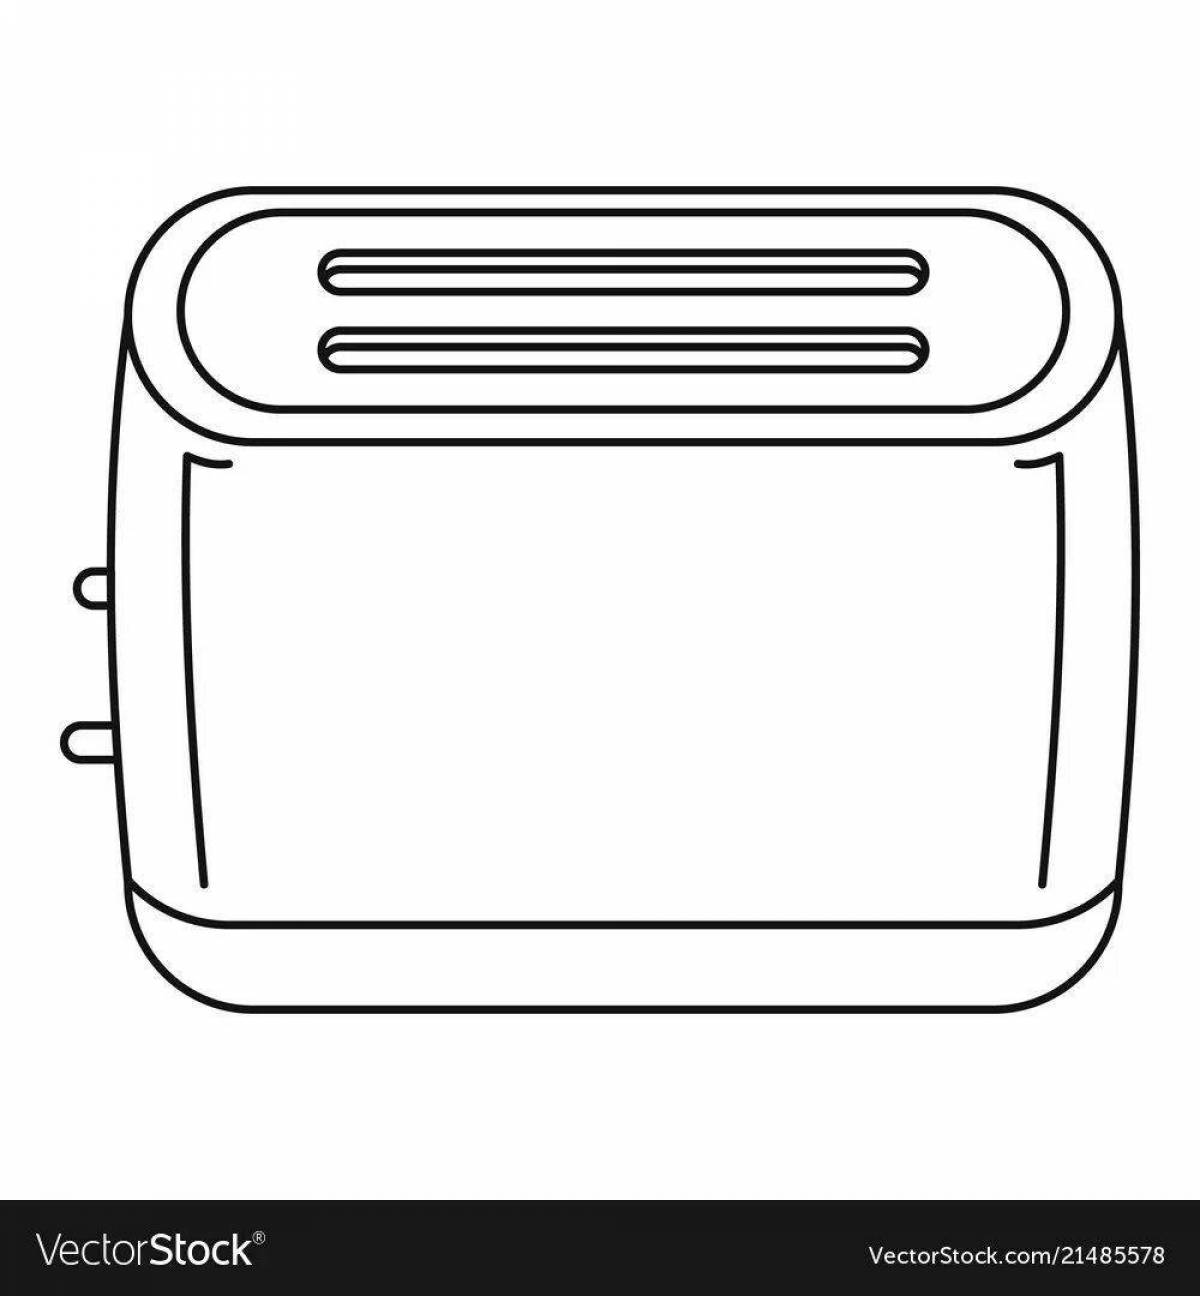 Playful toaster coloring page